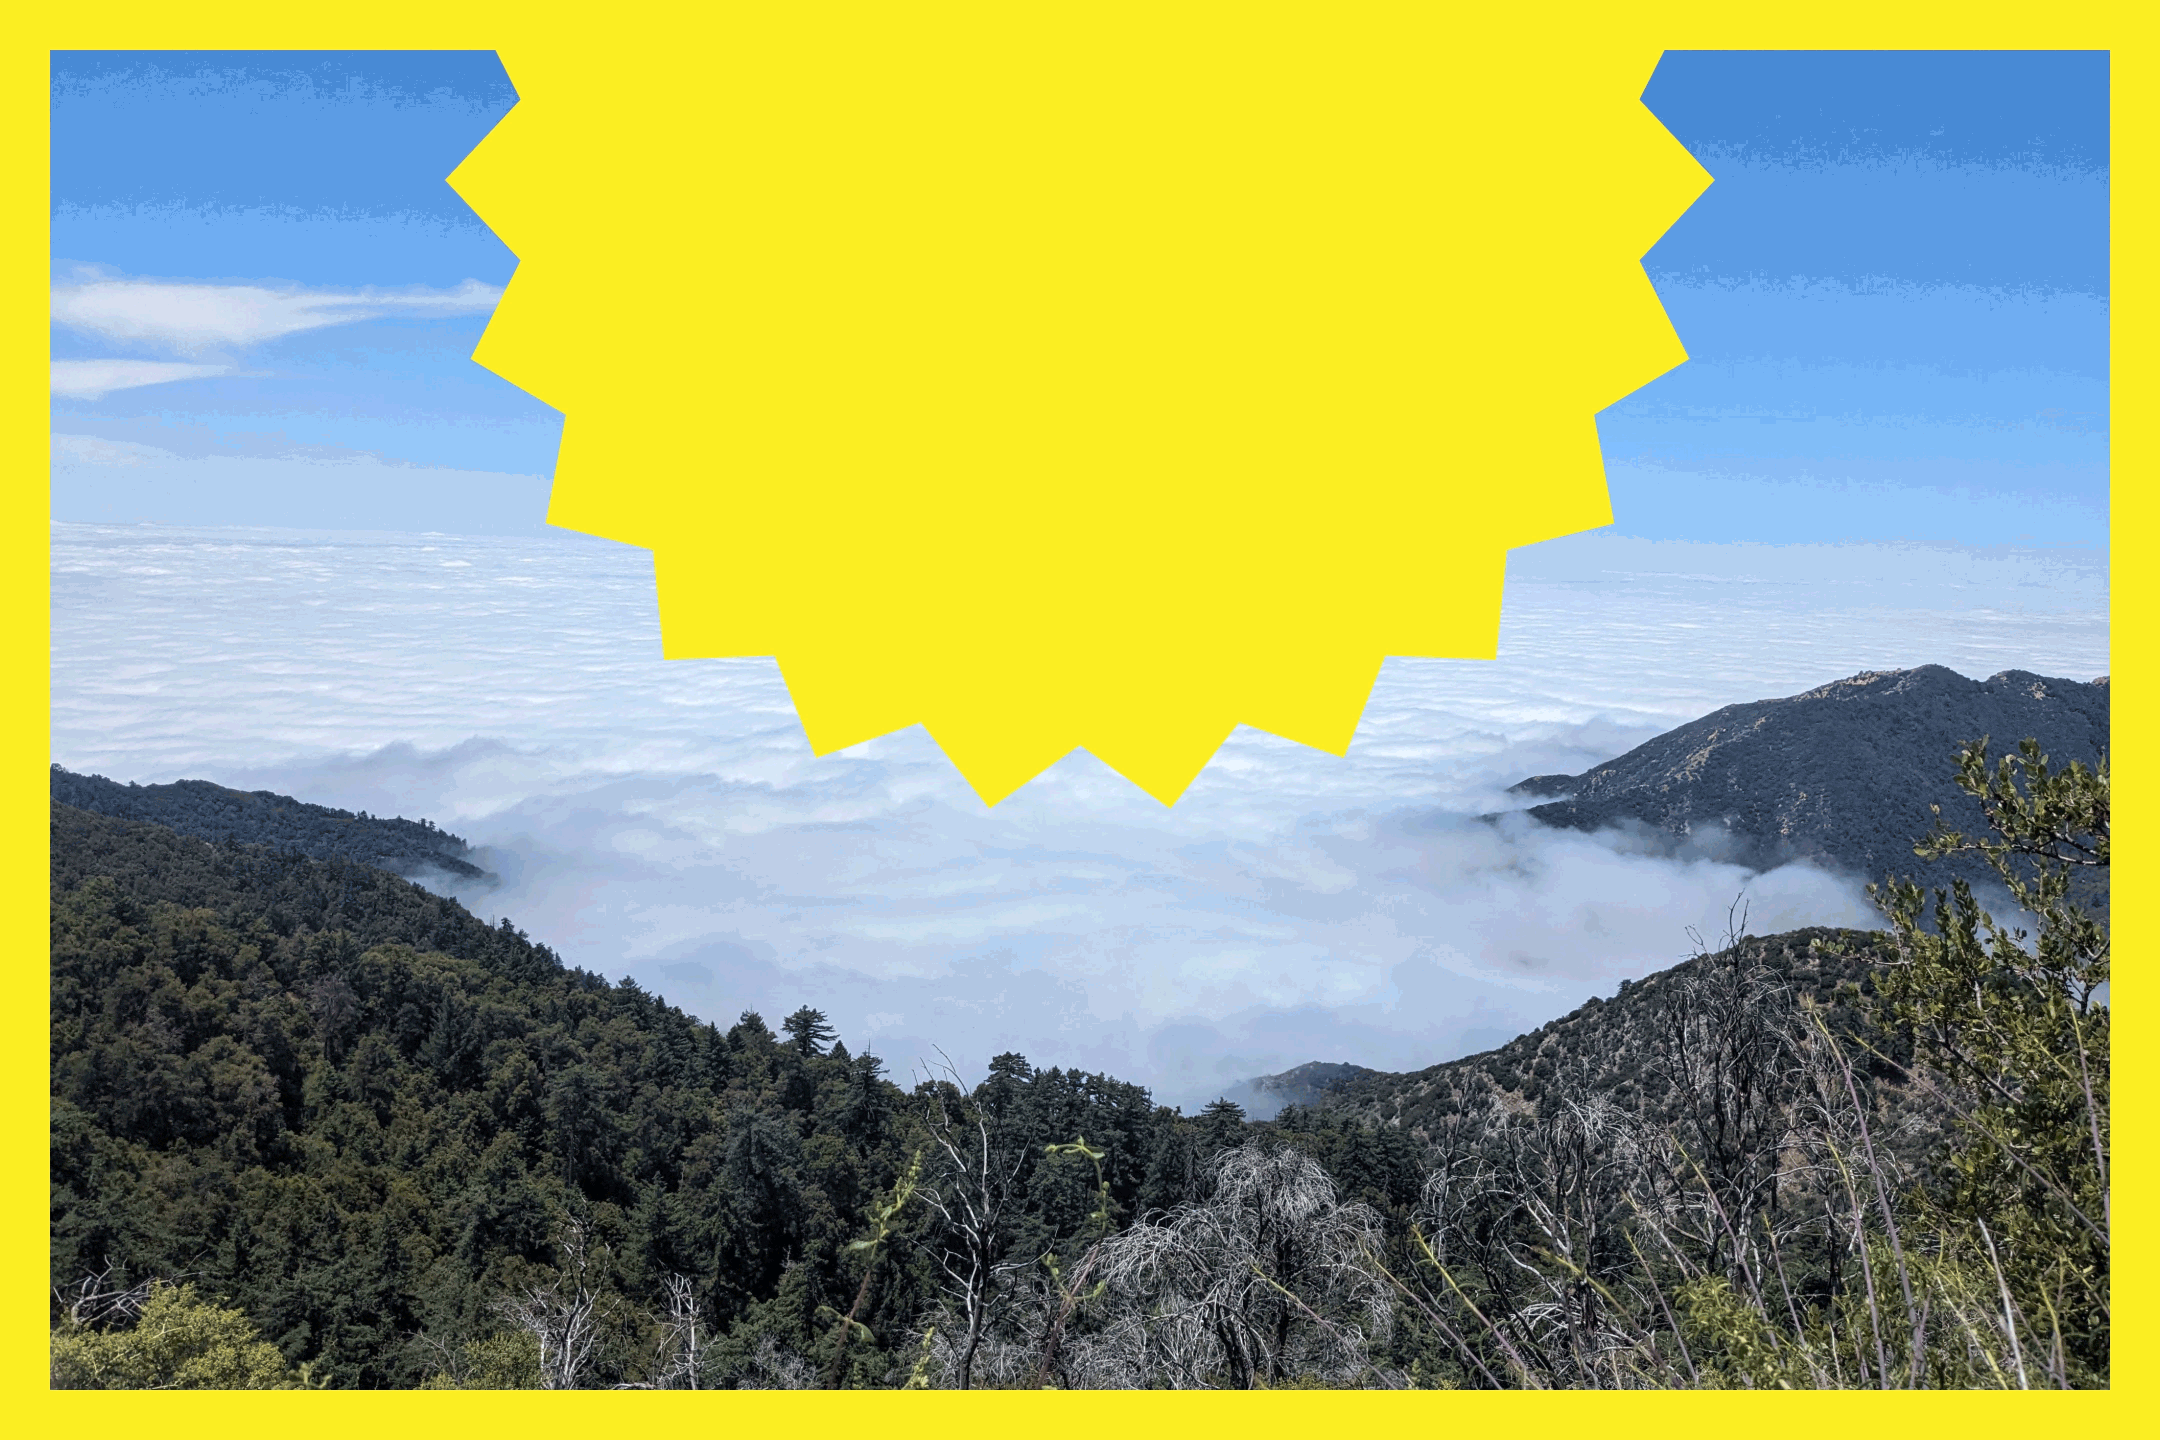 A view from Mt. Wilson Trail looking out to clouds and trees